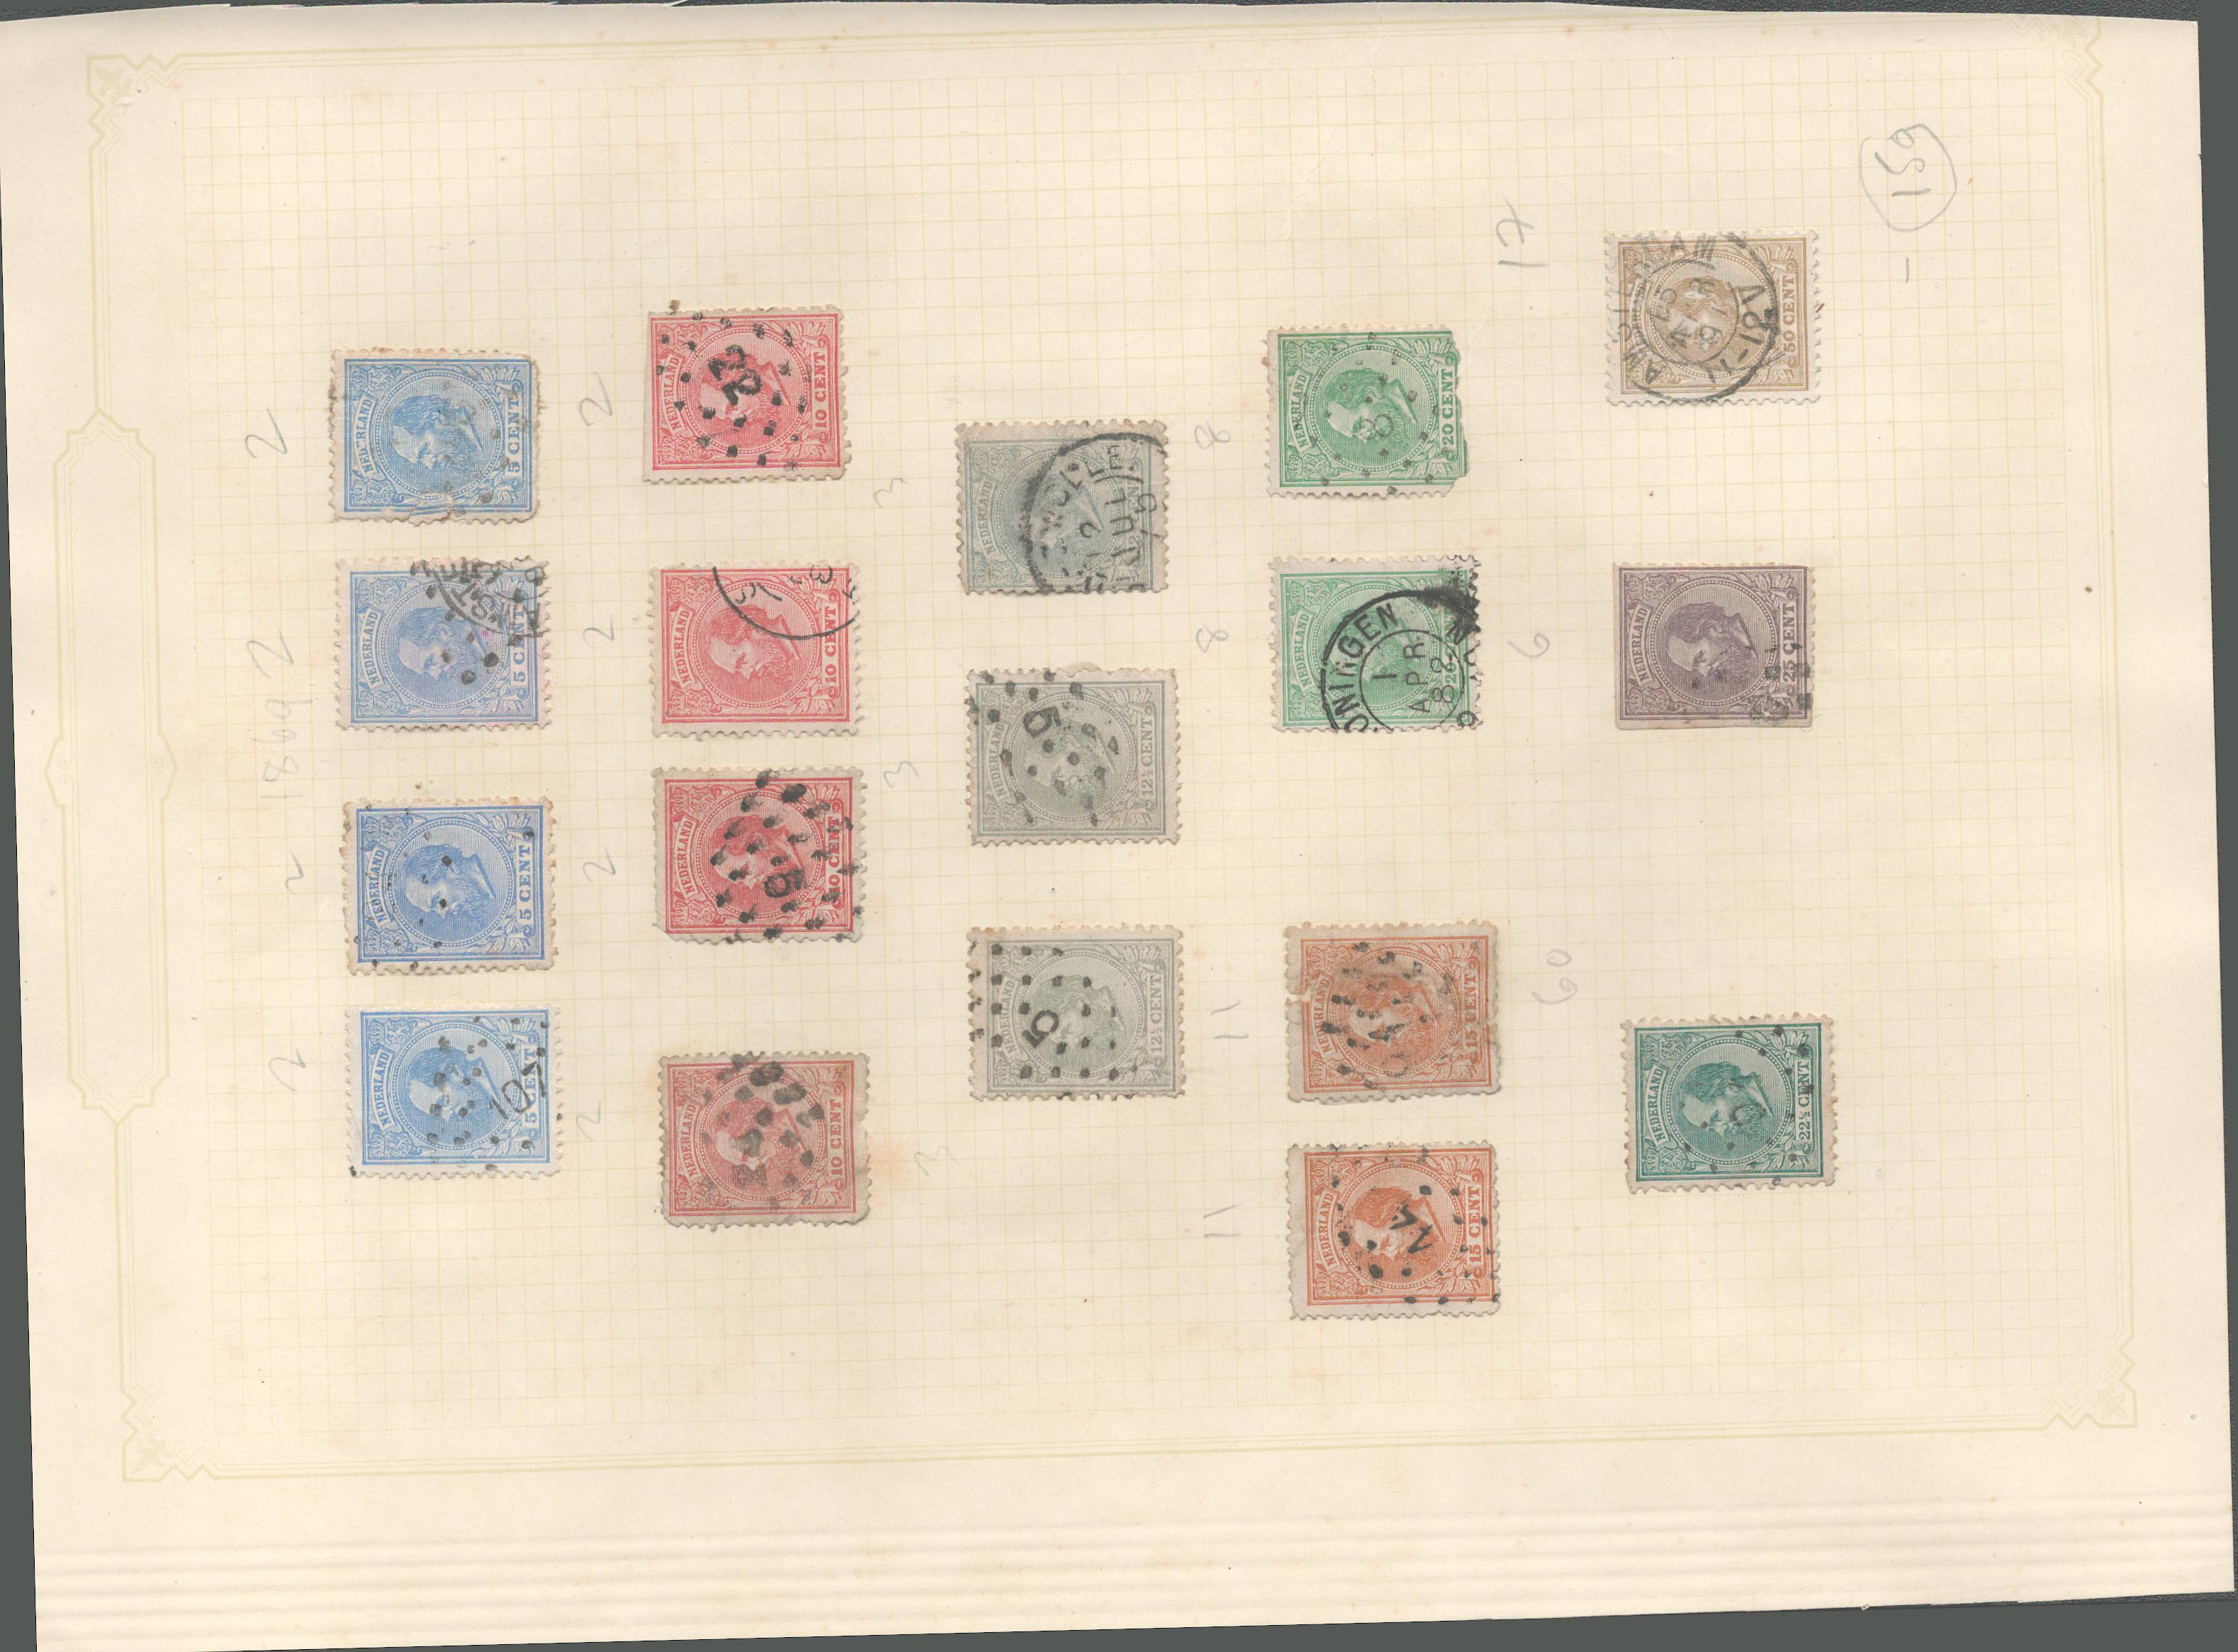 Dutch stamp collection on 1 loose album page. 18 stamps. 1869. Cat value approx. £150. Good